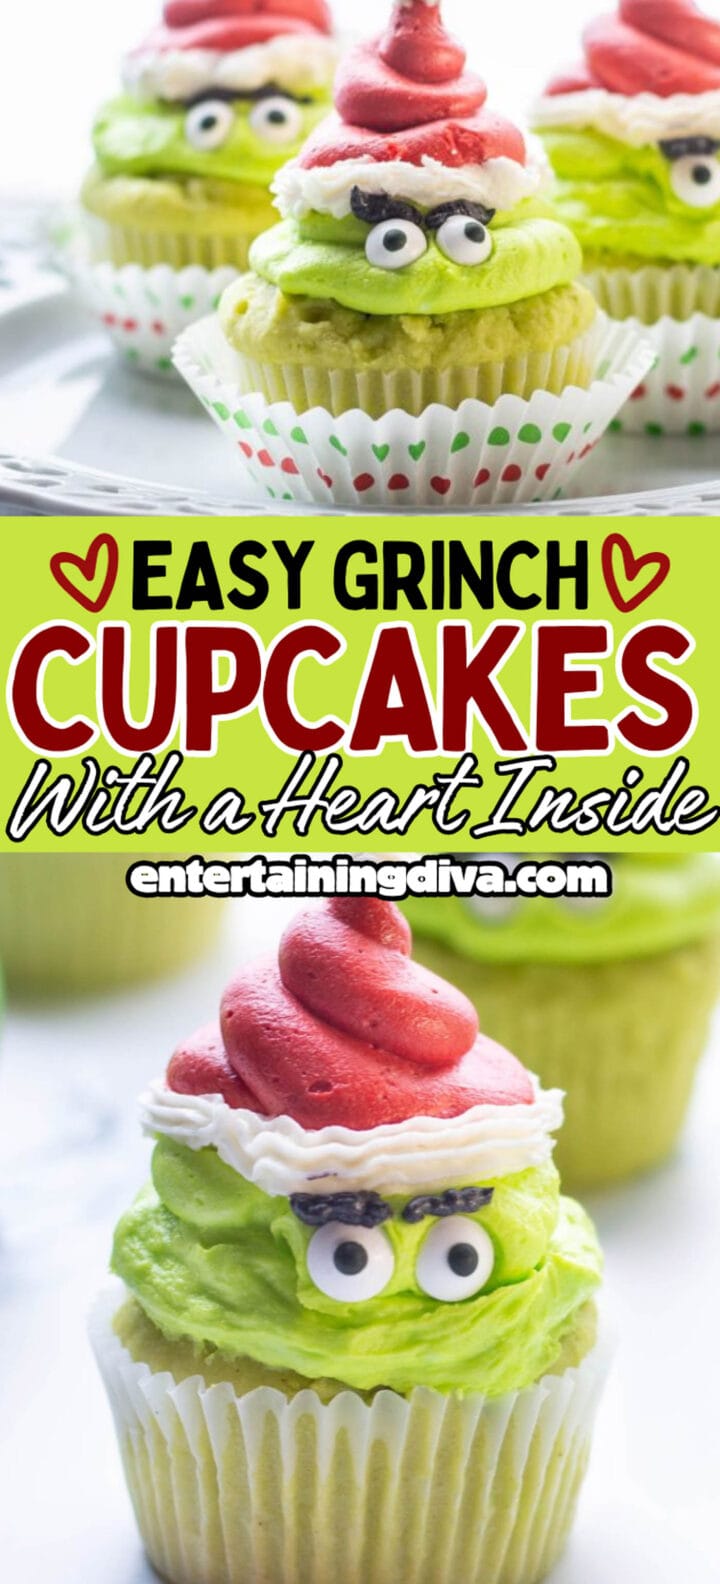 Easy cupcakes with a heart inside.